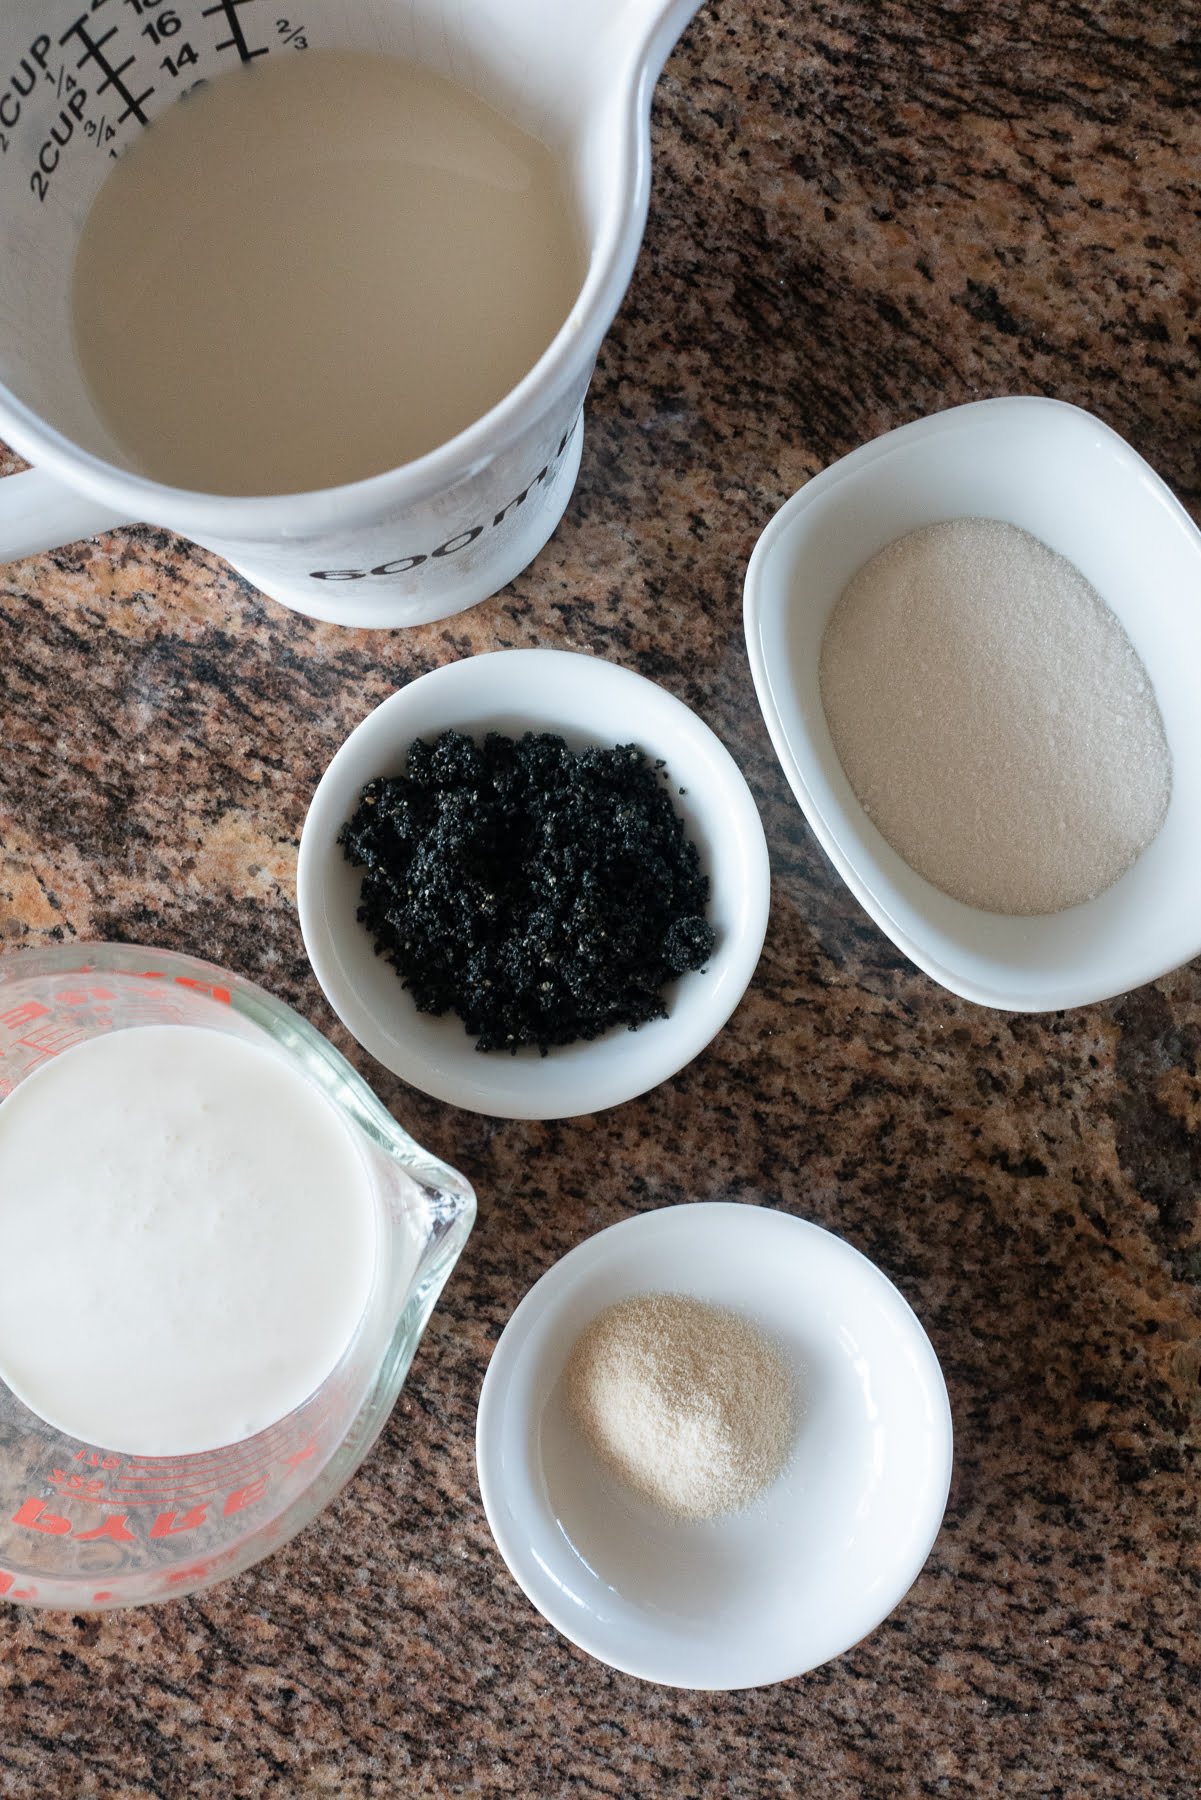 Ingredients to make black sesame and soy milk pudding laid out on a countertop.